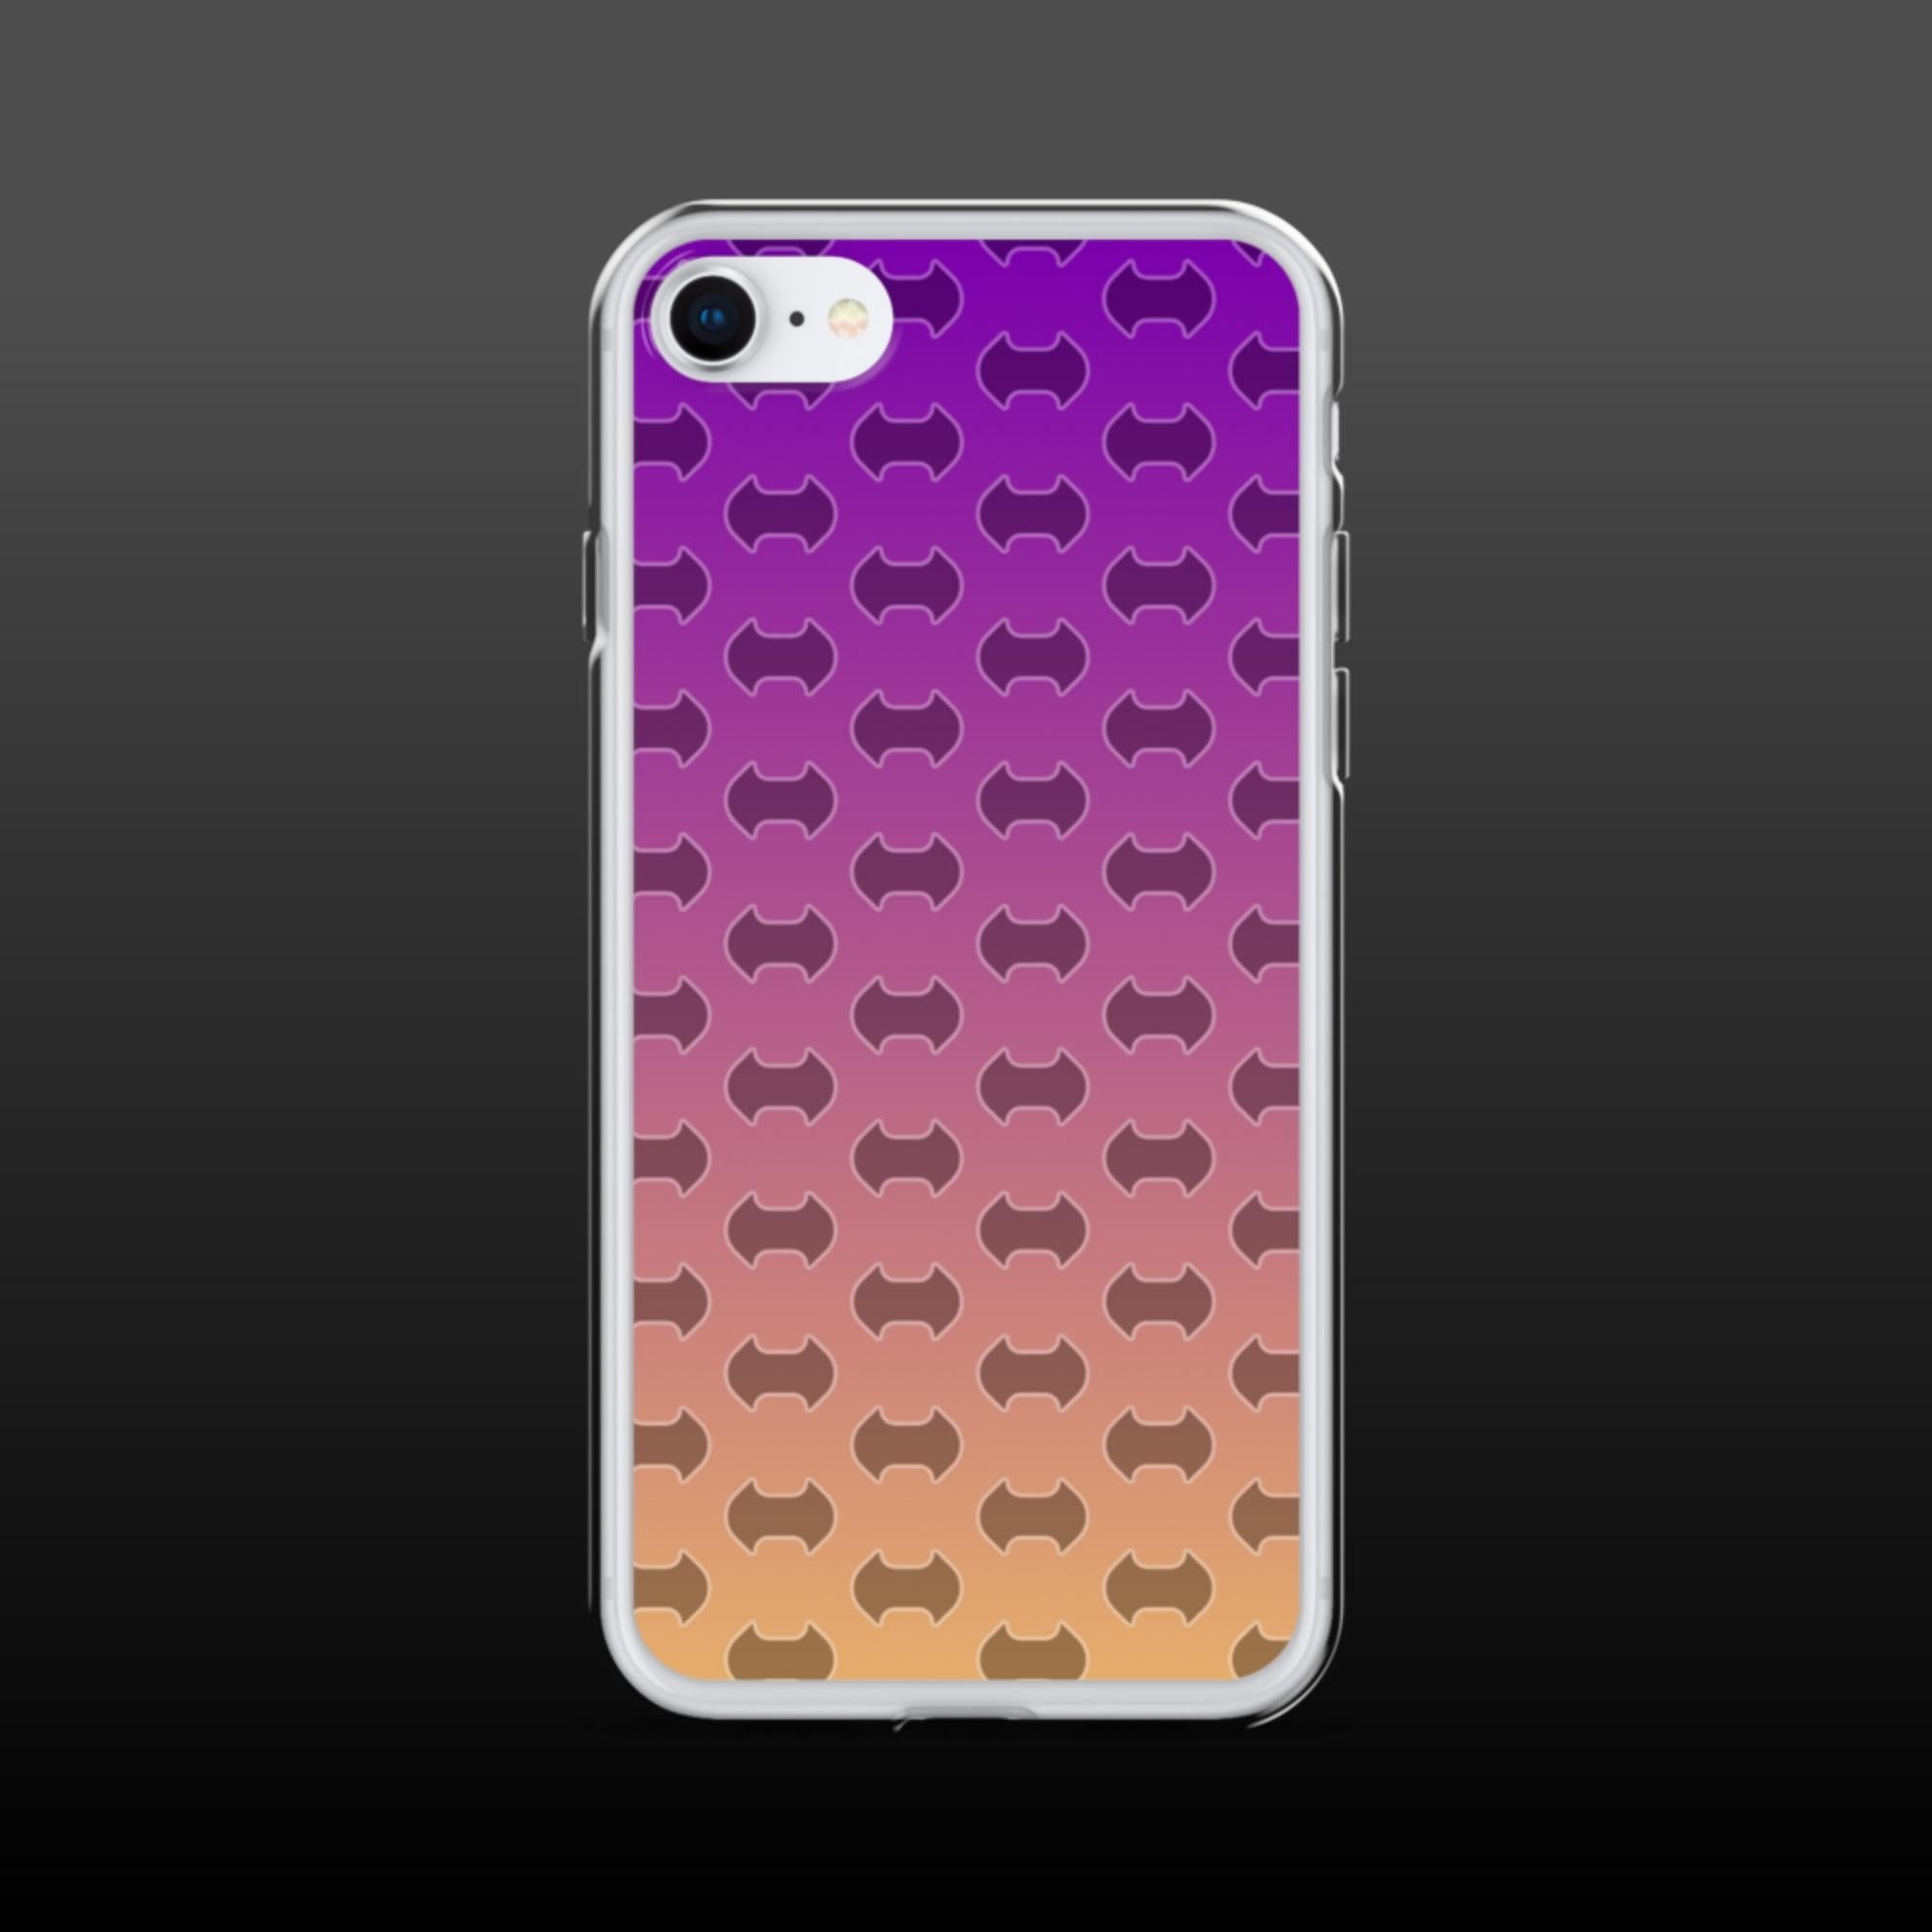 "Bats pattern" clear iphone case - Clear iphone case - Ever colorful